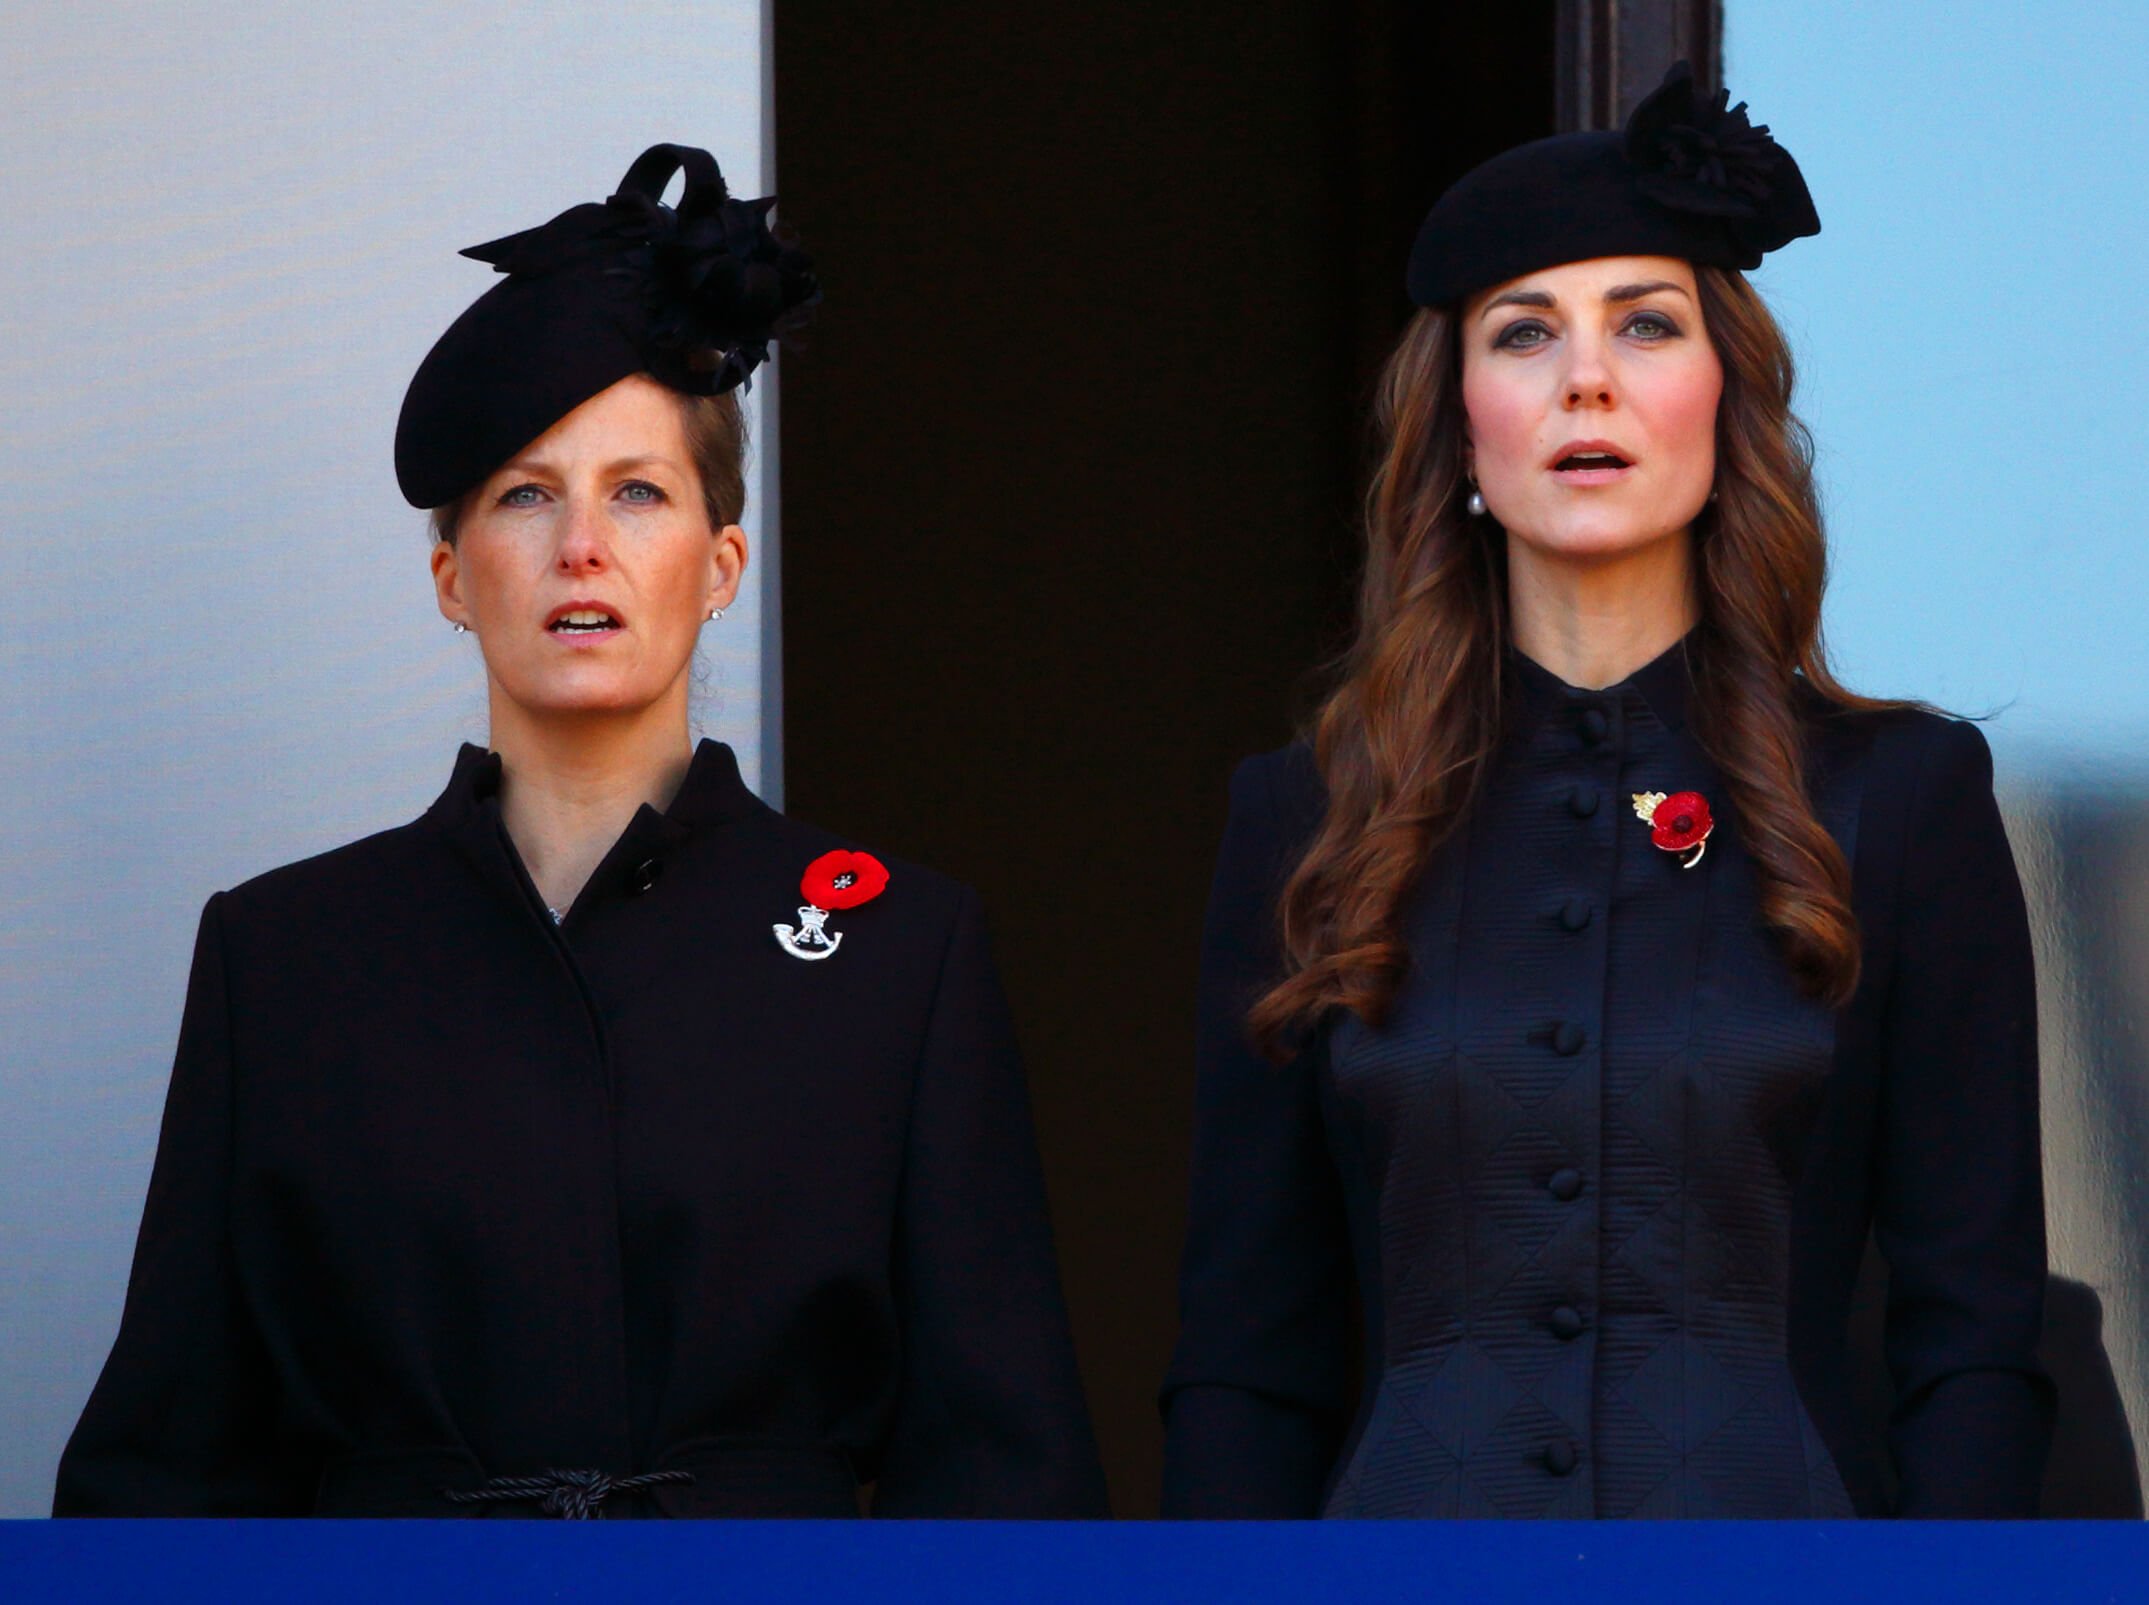 Body Language Expert Breaks Down Moment Kate Middleton and Sophie Looked ‘Horrified’ During Huge Royal Event